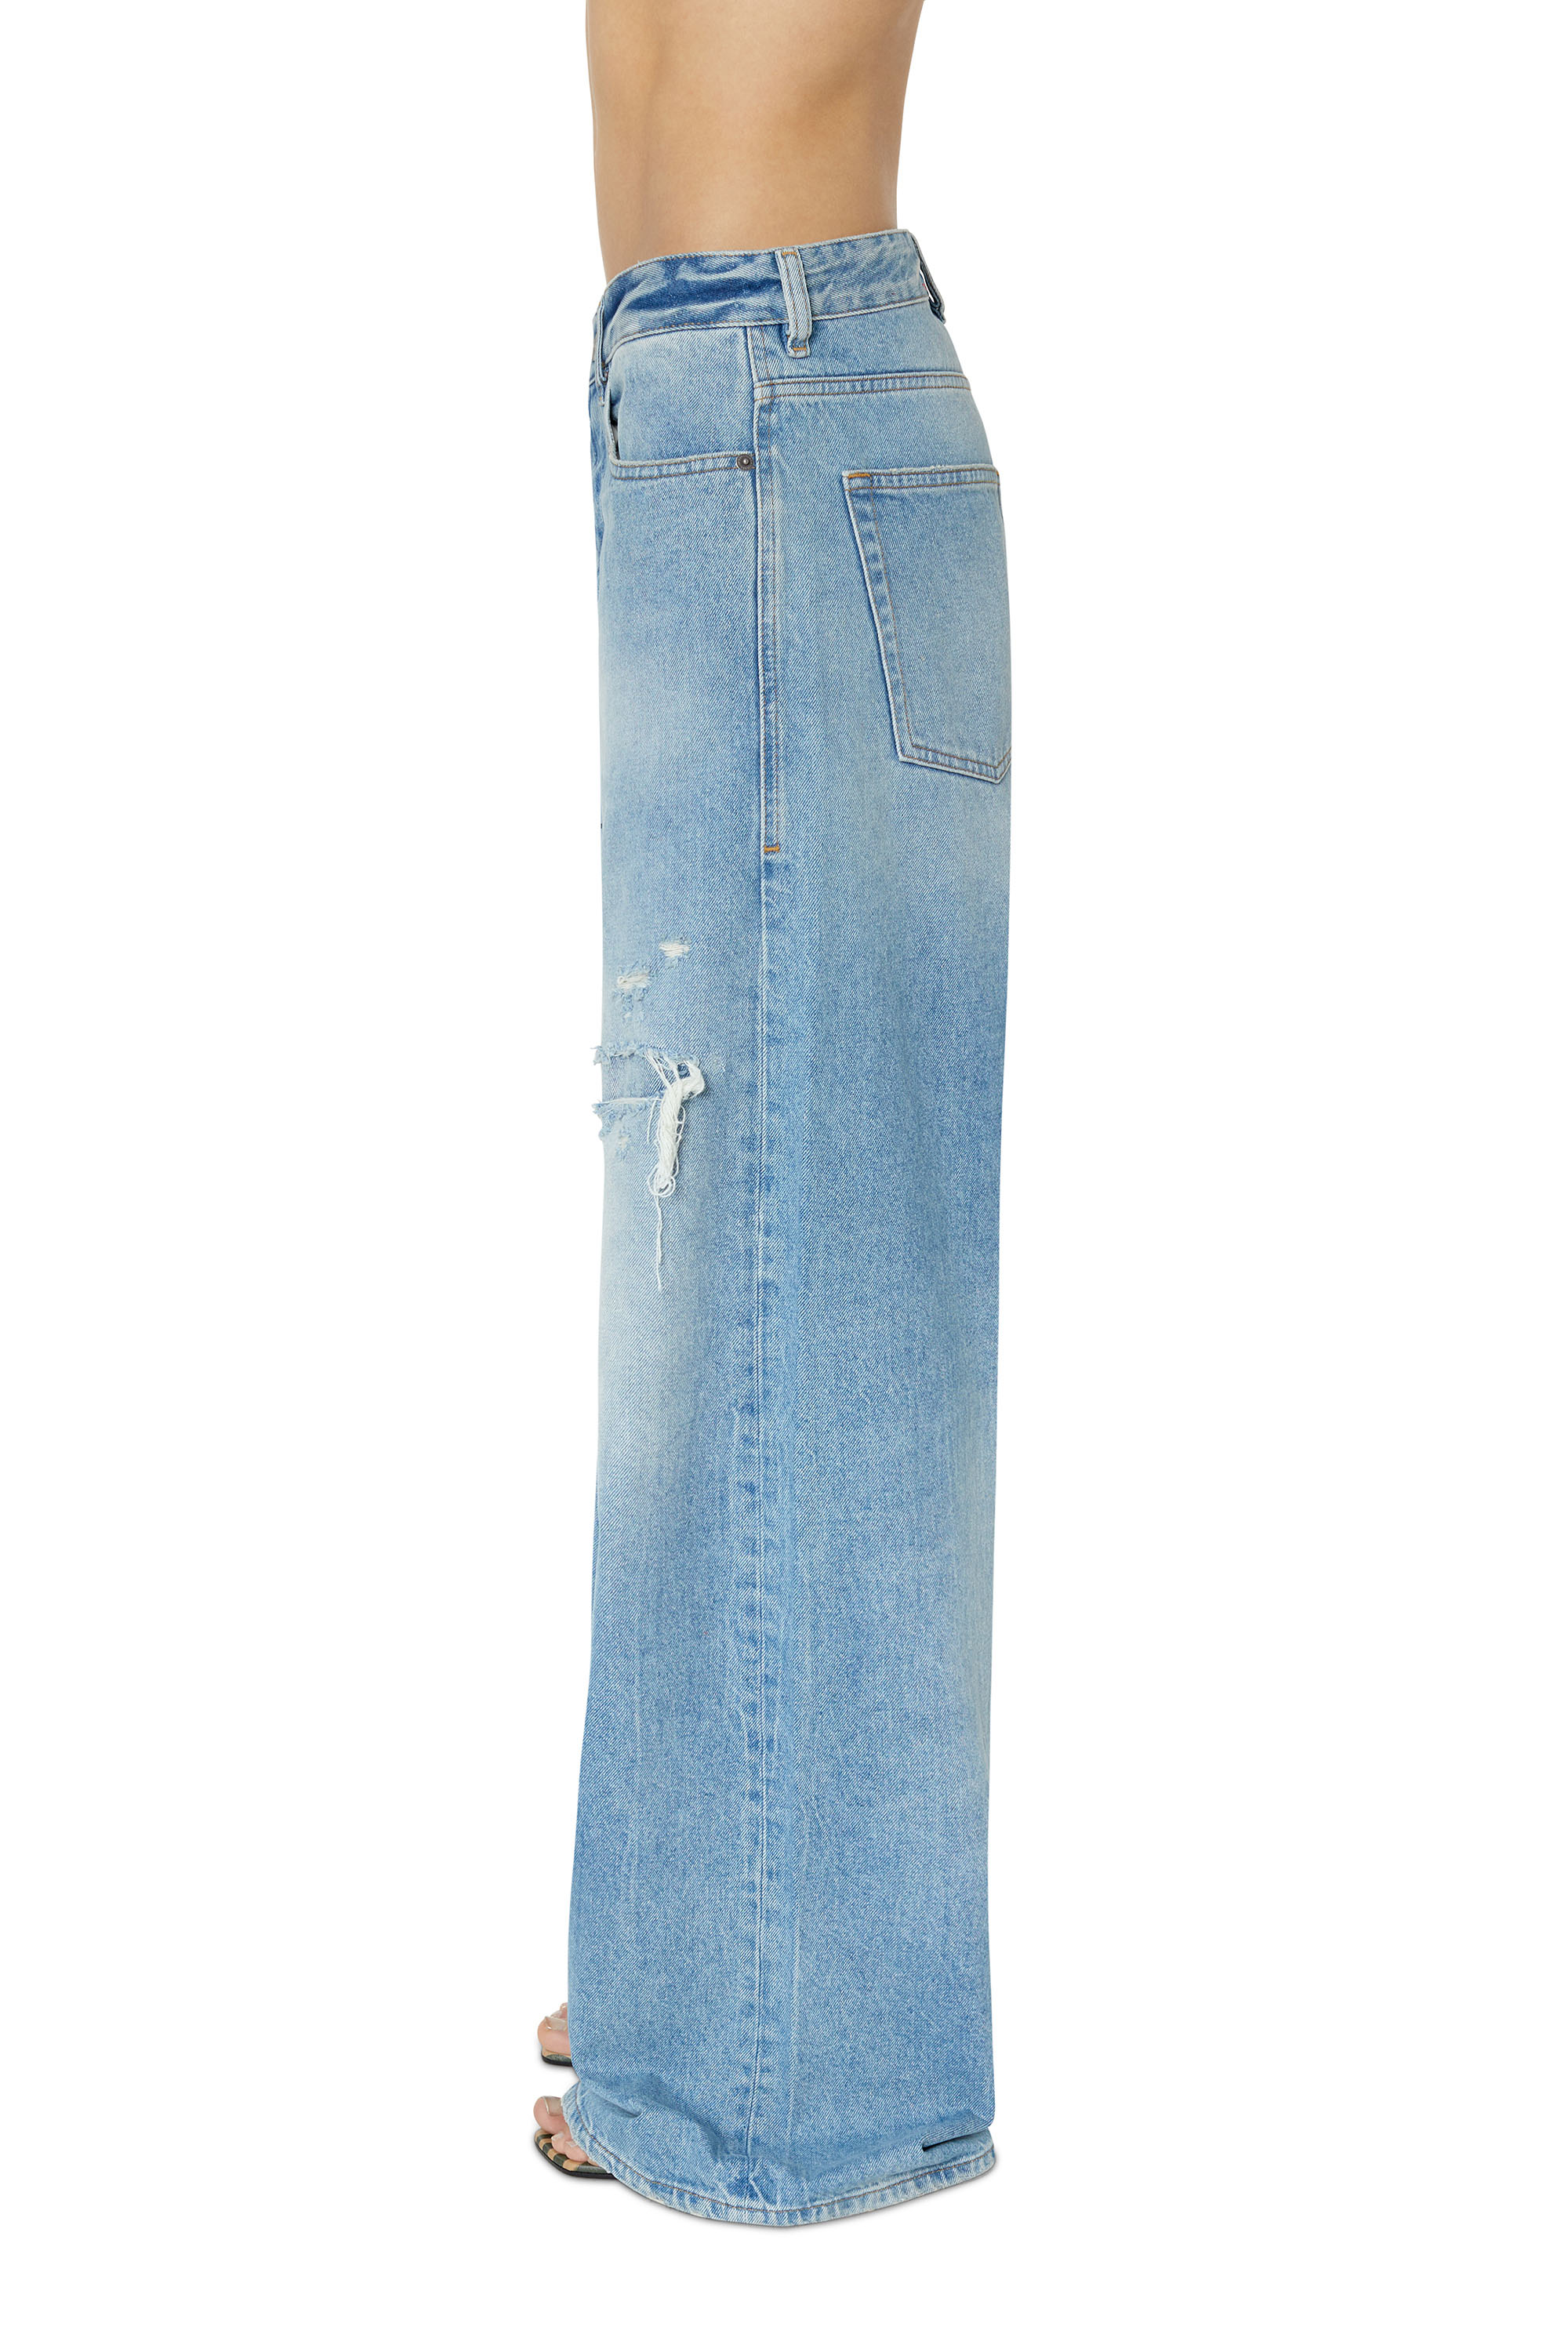 Diesel Industry Jeans taille basse bleu style d\u00e9contract\u00e9 Mode Jeans Jeans taille basse 